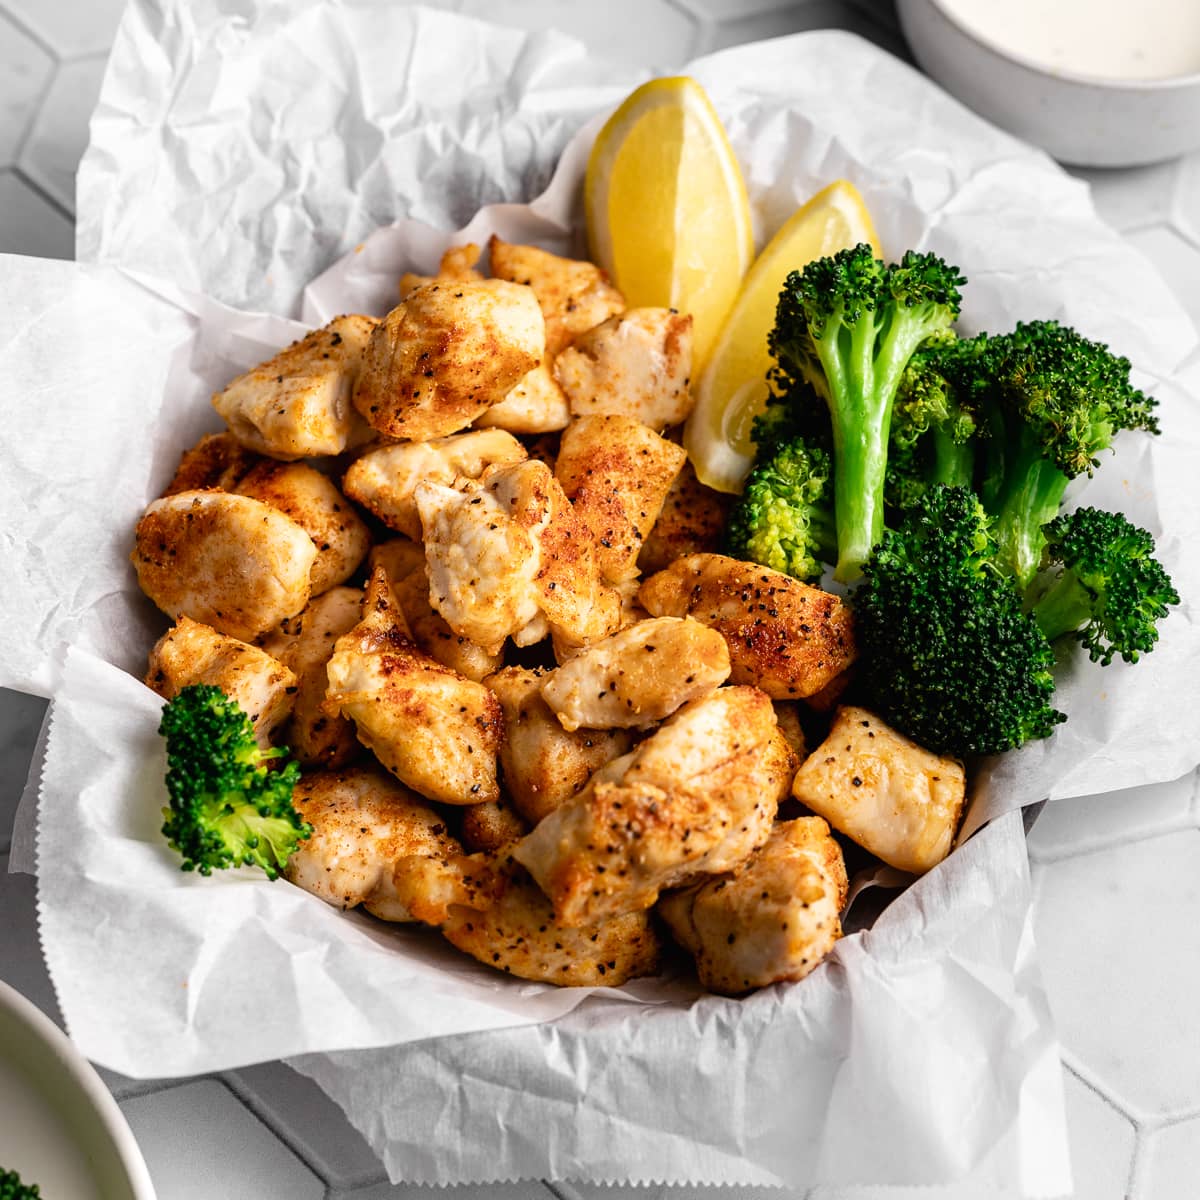 Air fryer chicken bites with broccoli and lemon wedges plated.